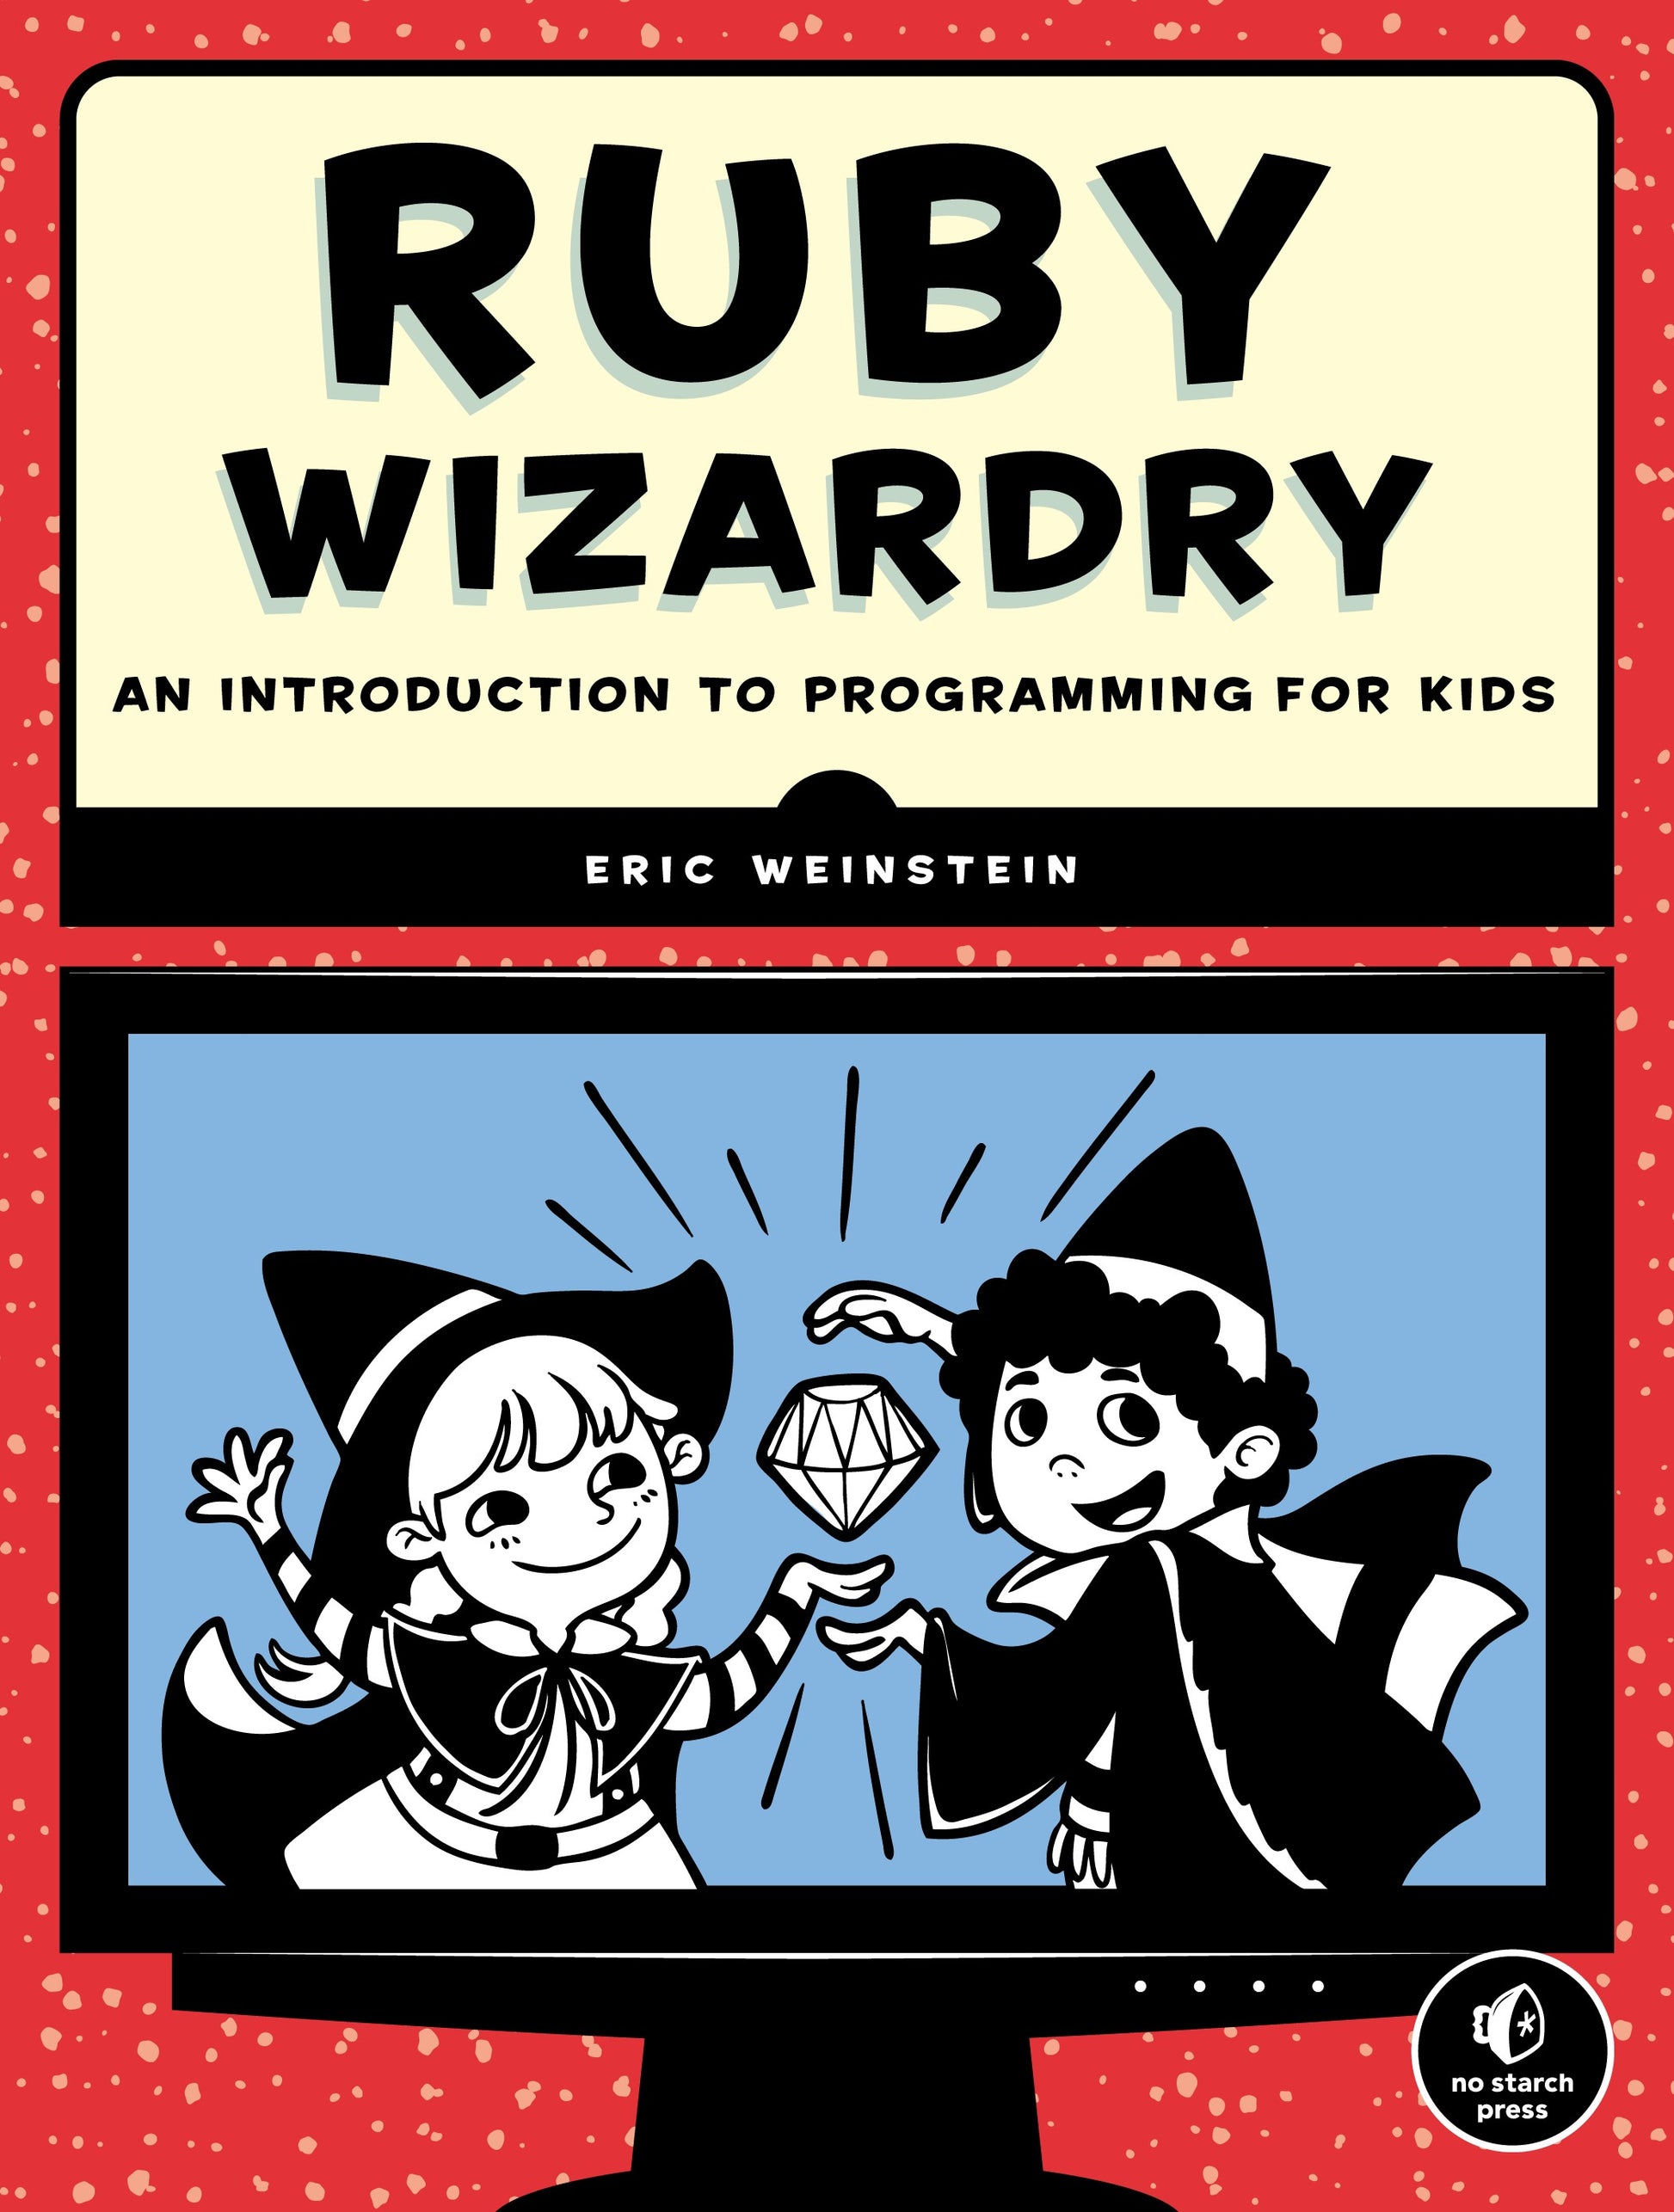 Ruby programming, programming for kids, interactive learning, whimsical programming curriculum, digital technology for schools, and engaging coding experience, Digital Technology Book, Digital Technology Resource, Computer Science Book, Electronics Book